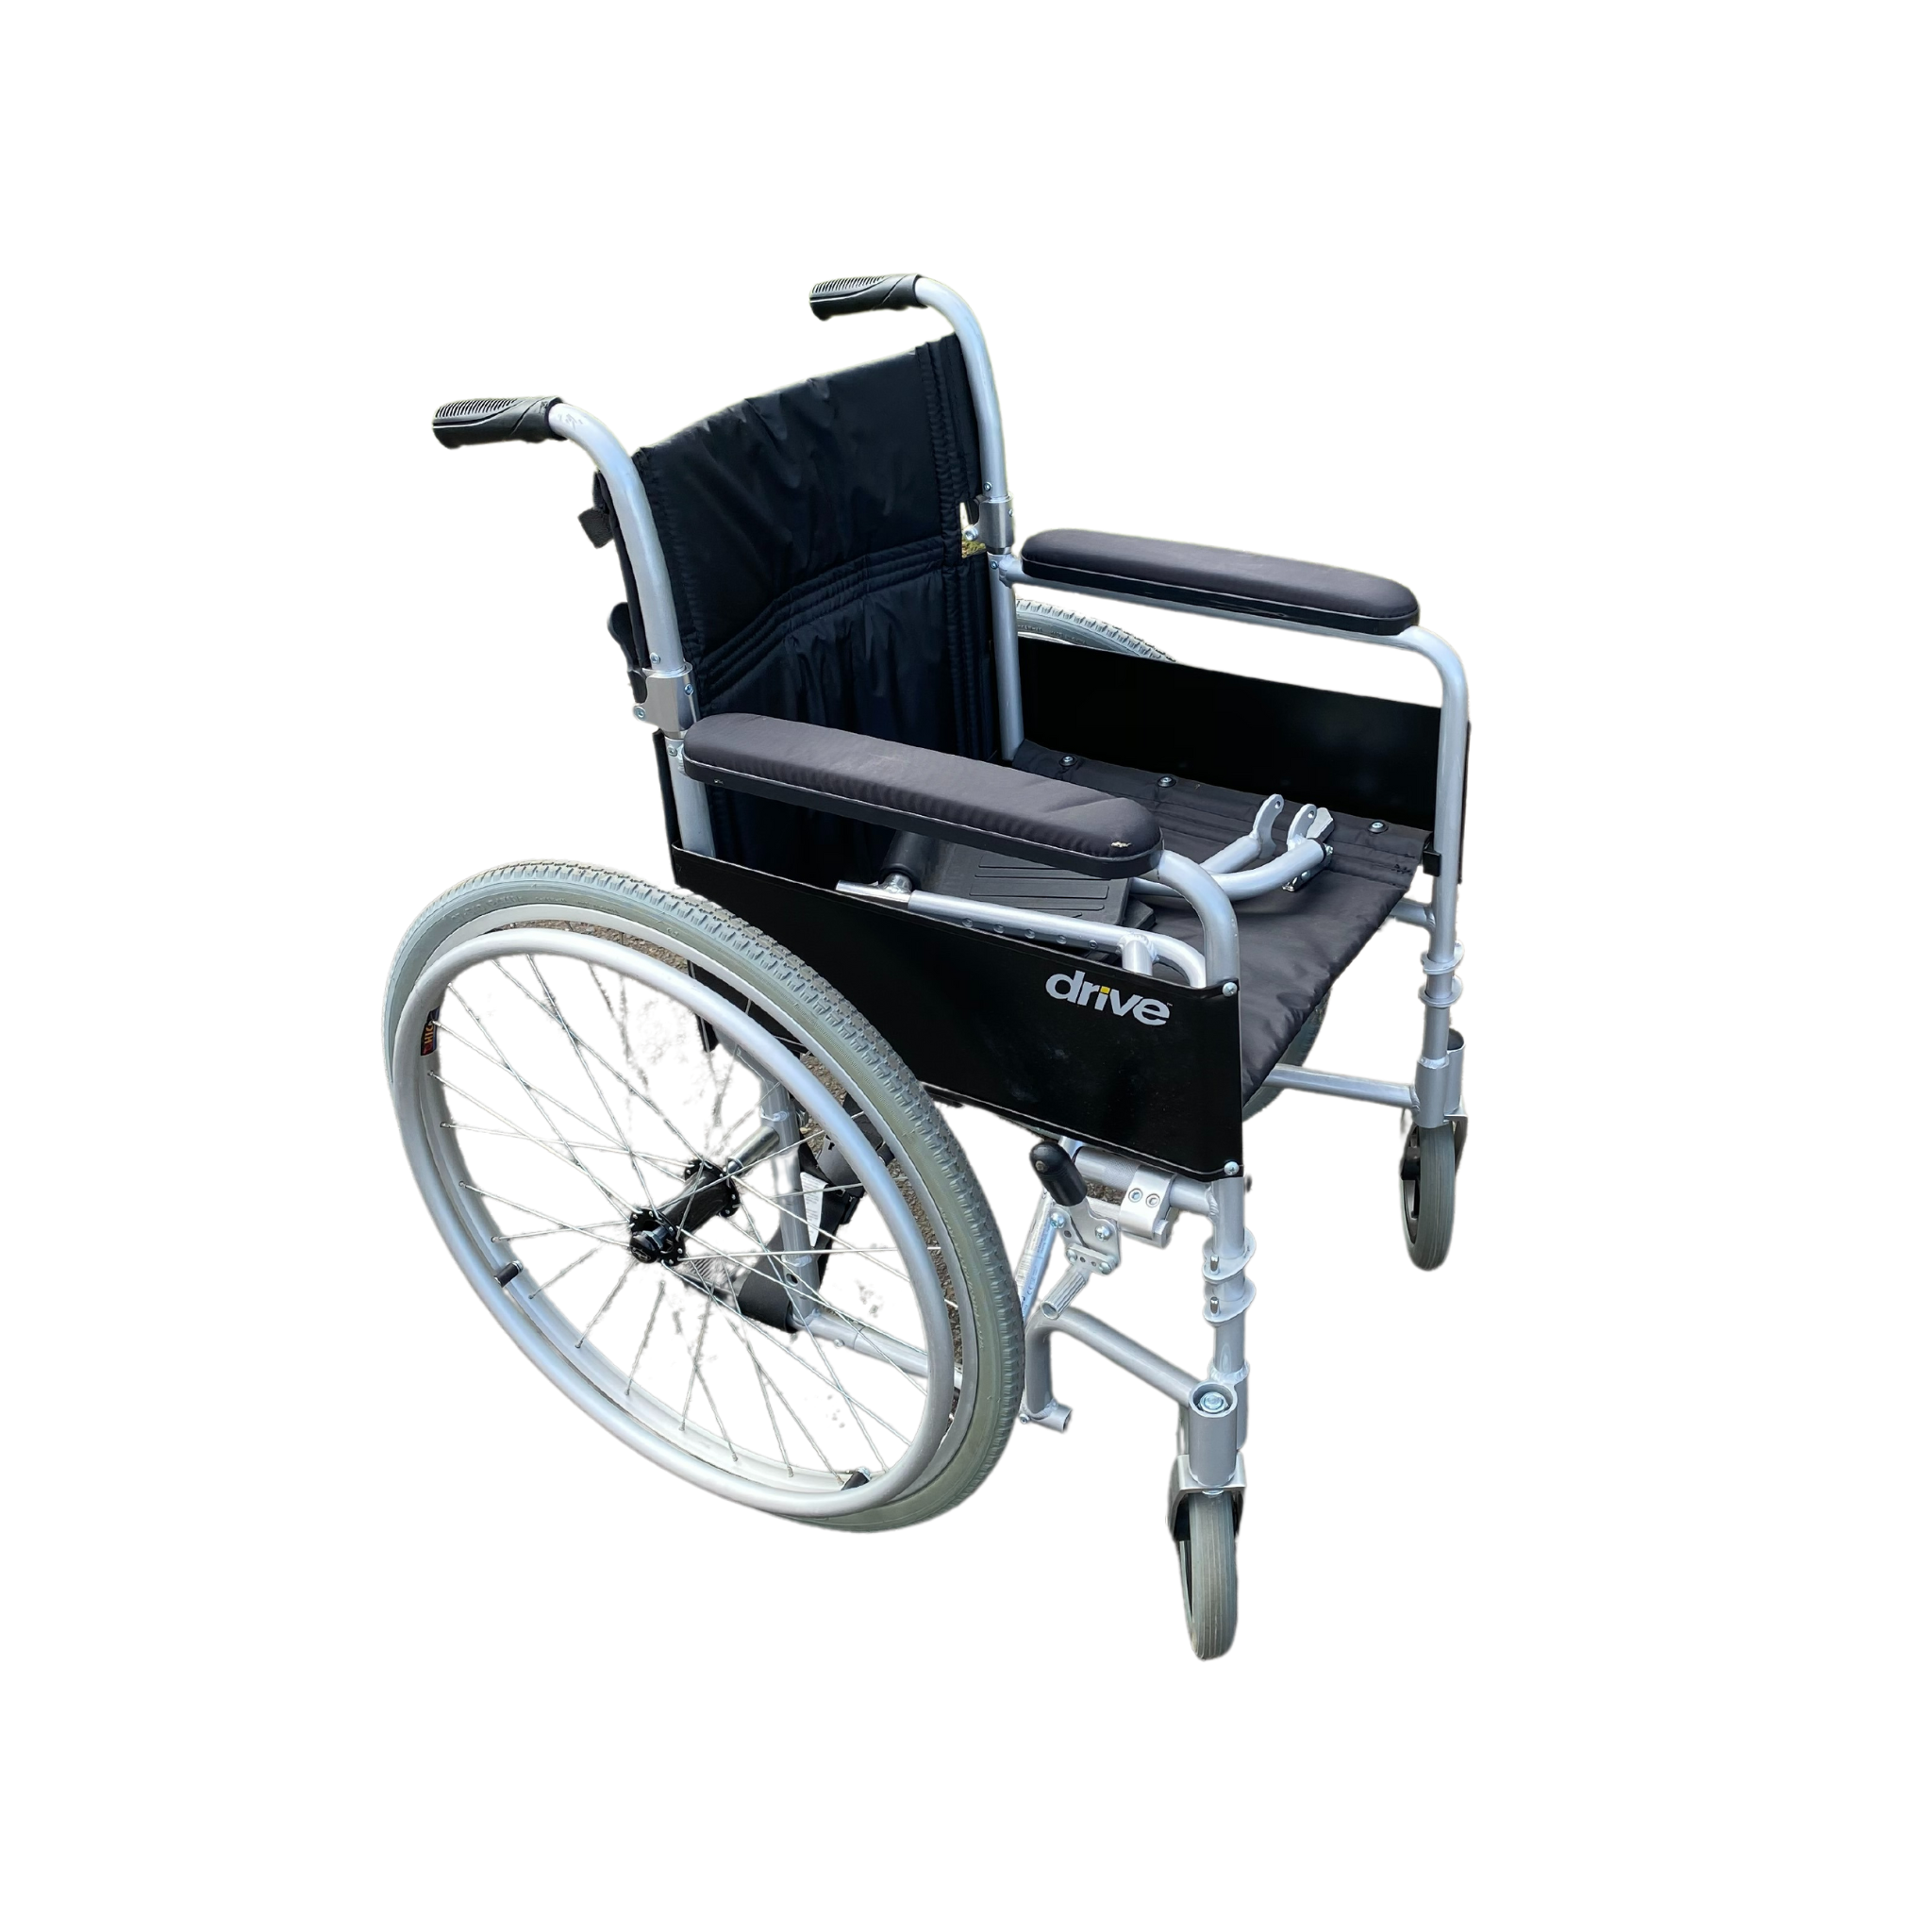 Rental - Drive Self-Propel 18" Wheelchair from Aged Care and Medical - Wheelchair for Hire for aged care